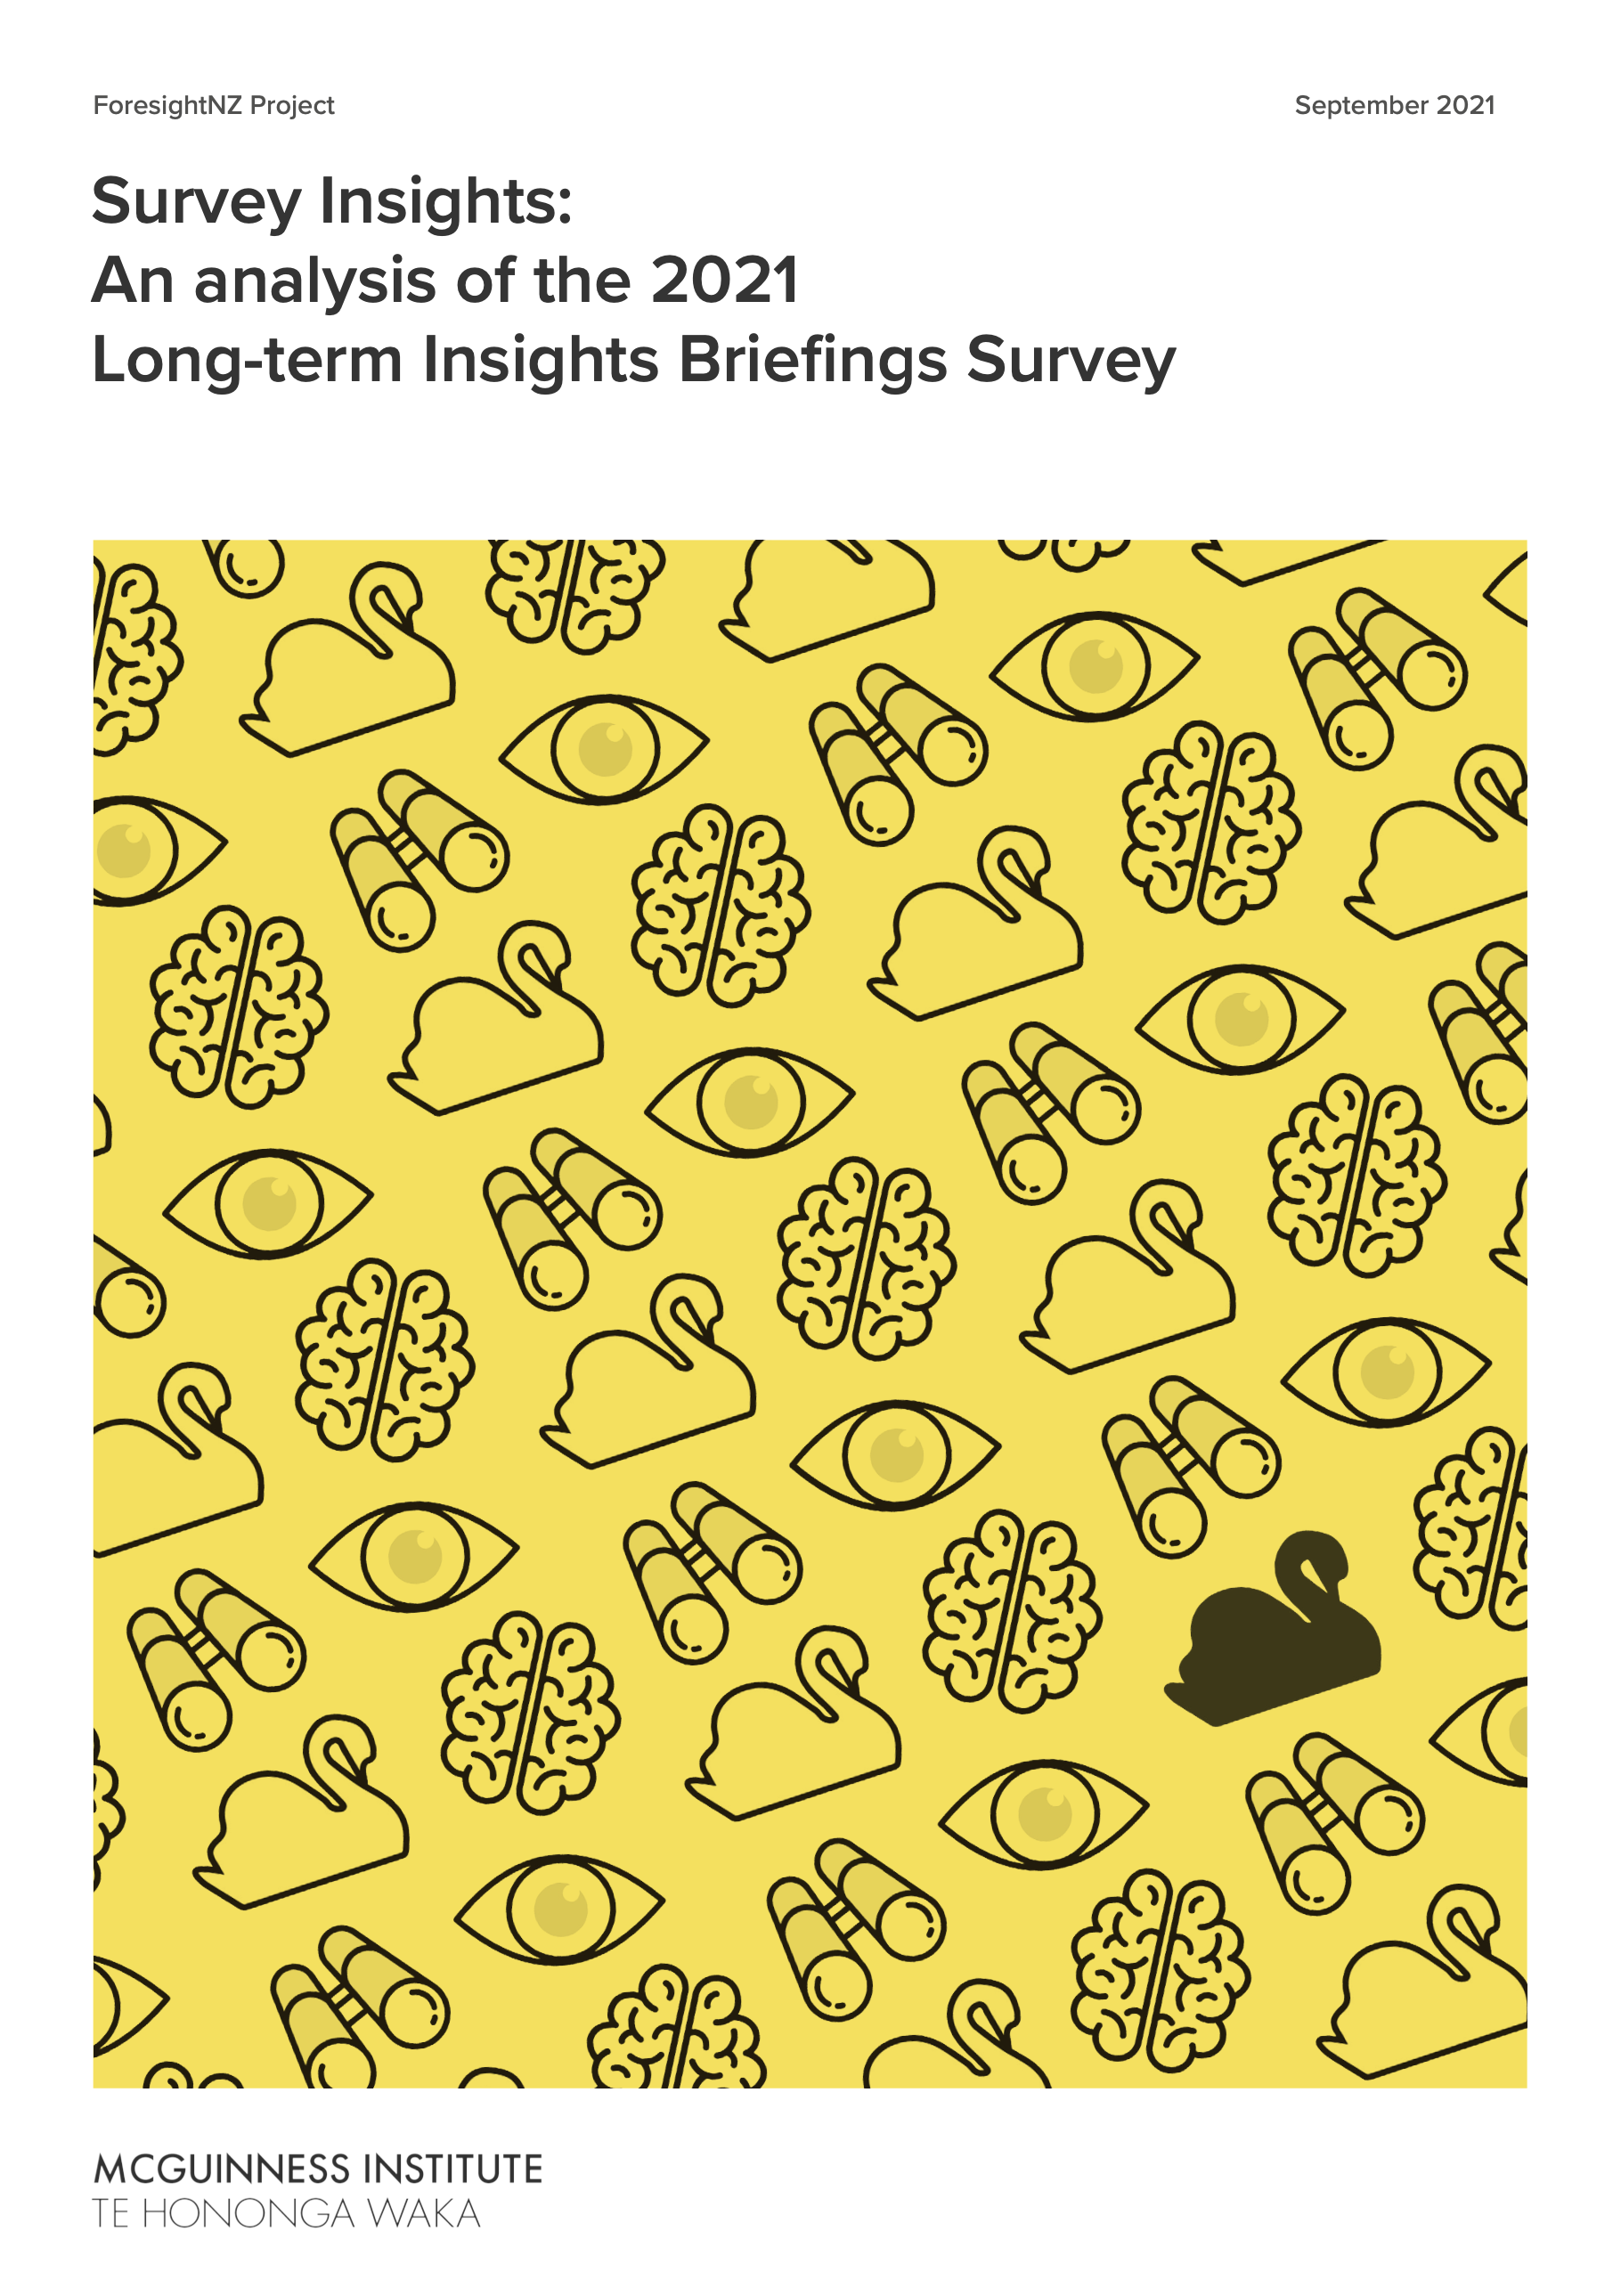 Survey Insights: An analysis of the 2021 Long-term Insights Briefings Survey